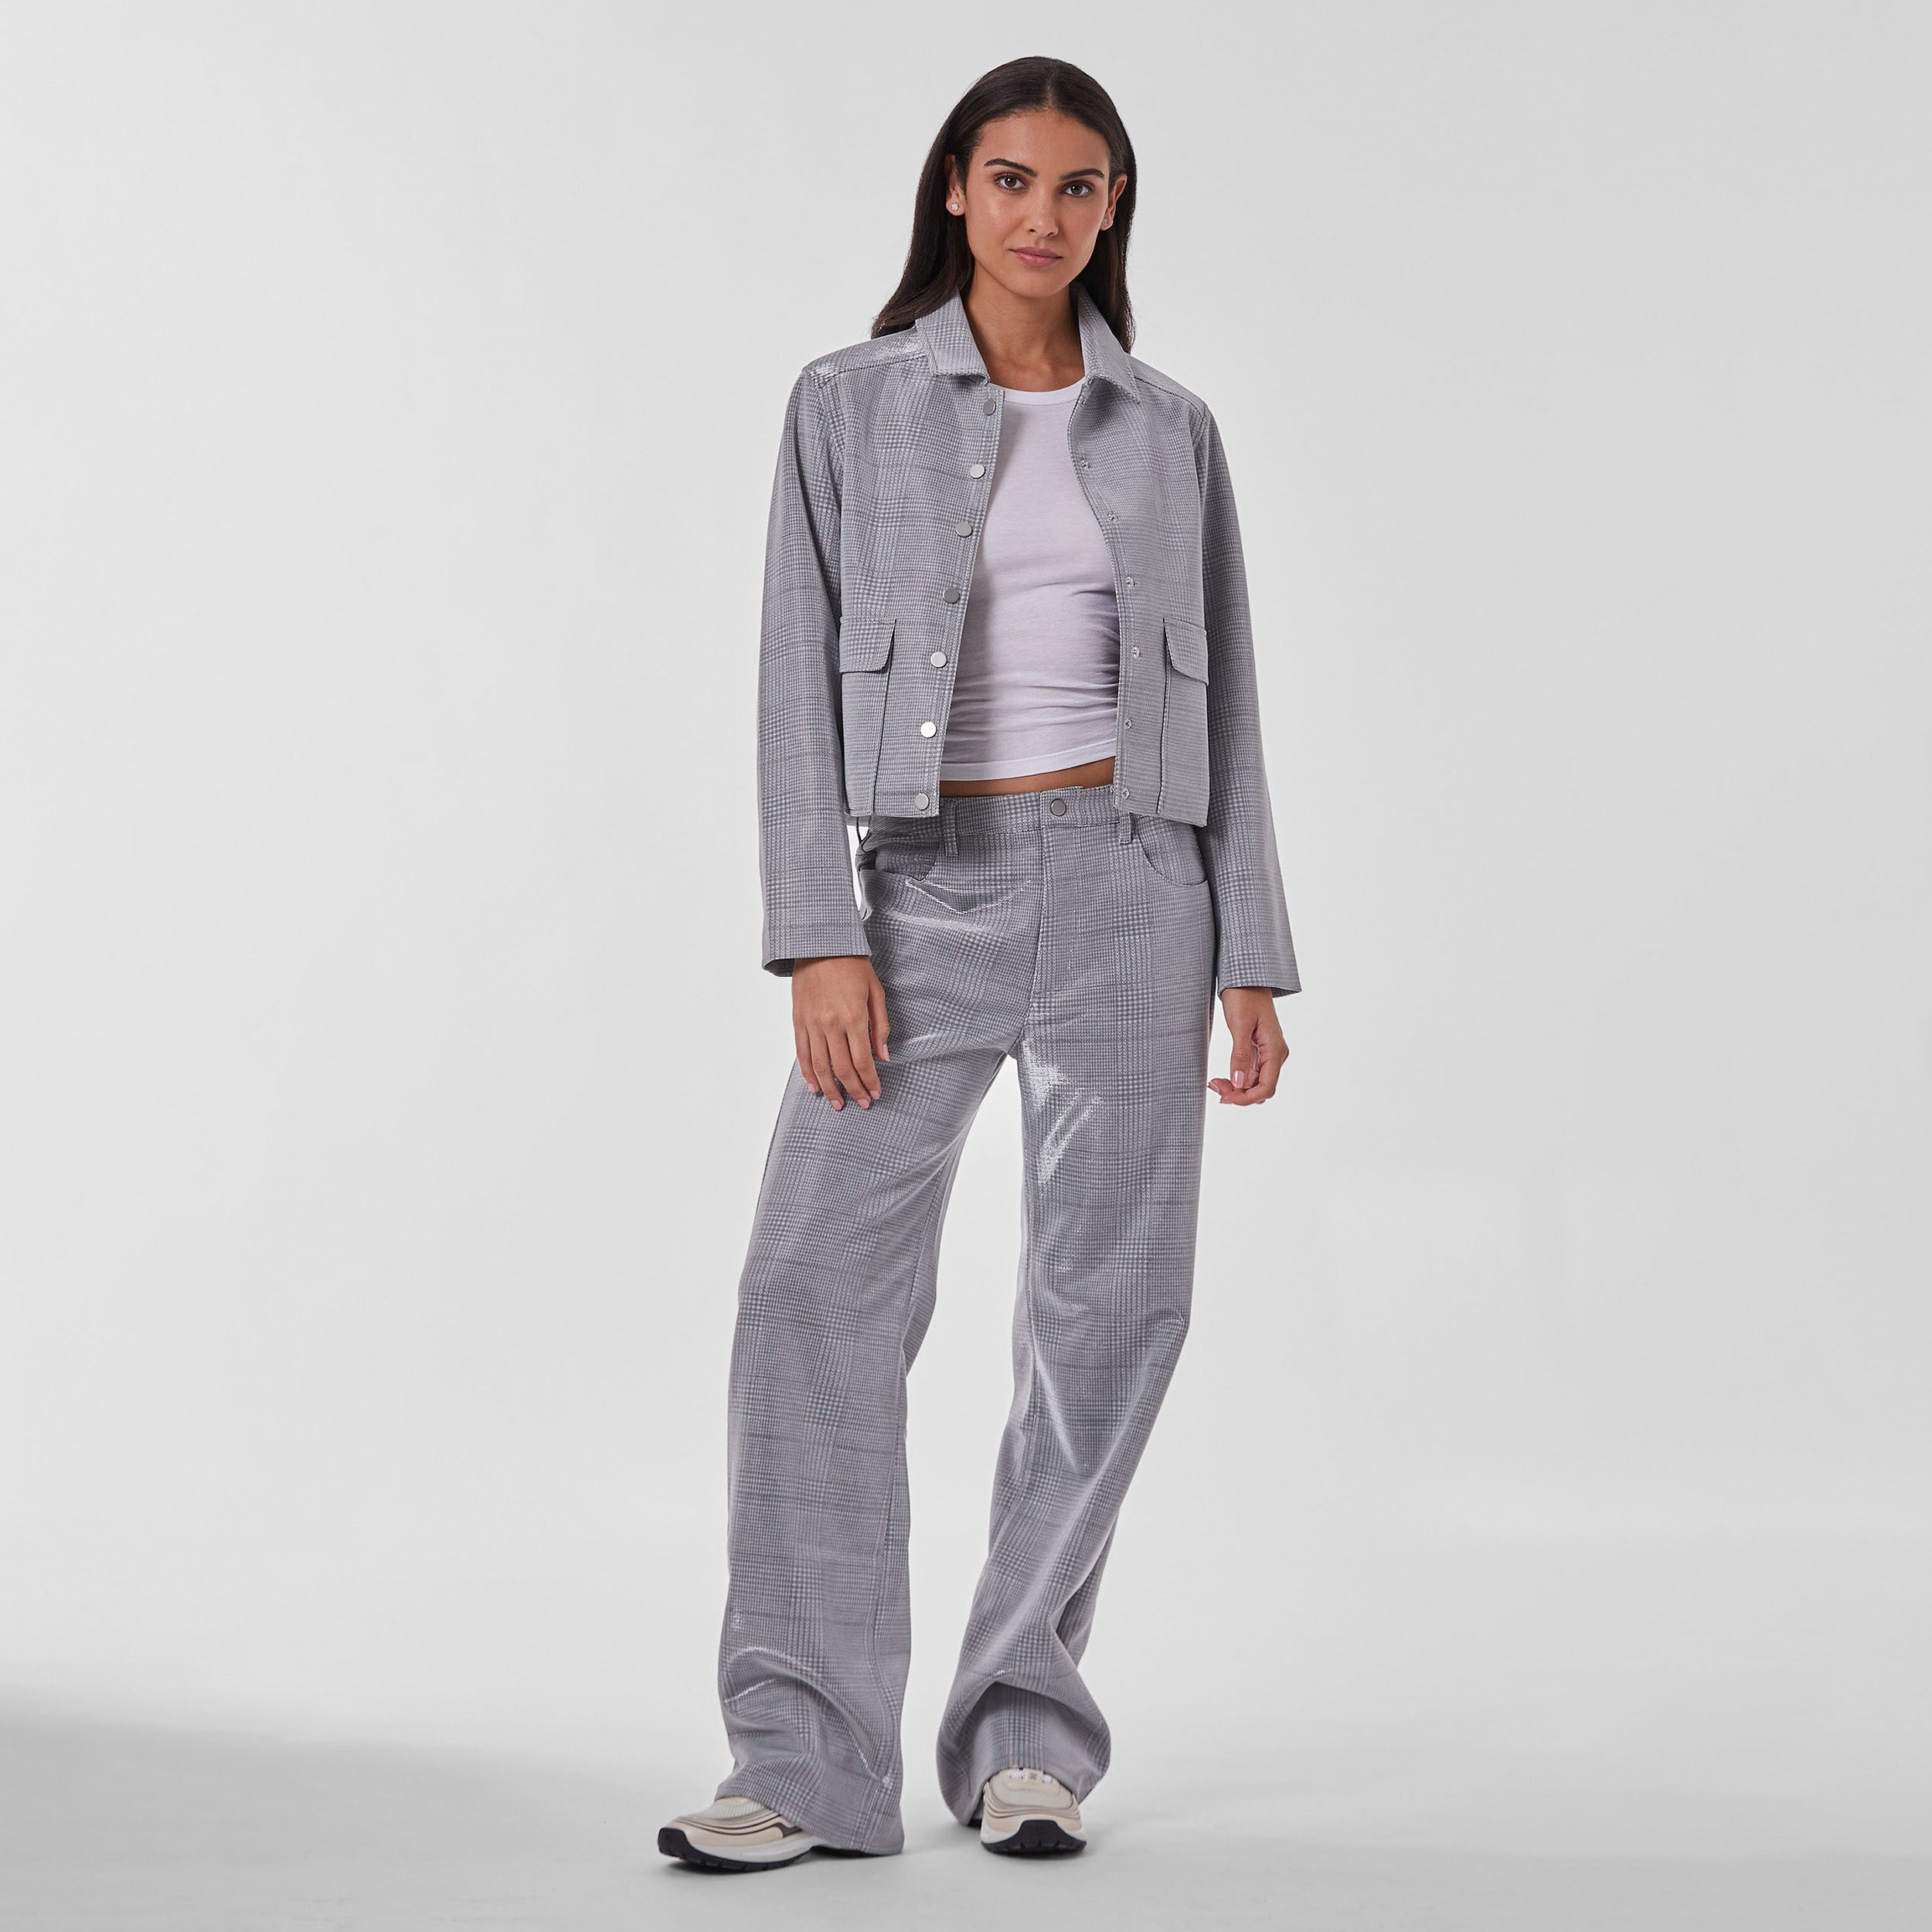 Woman wearing silver plaid patterned cropped jacket and matching pants.